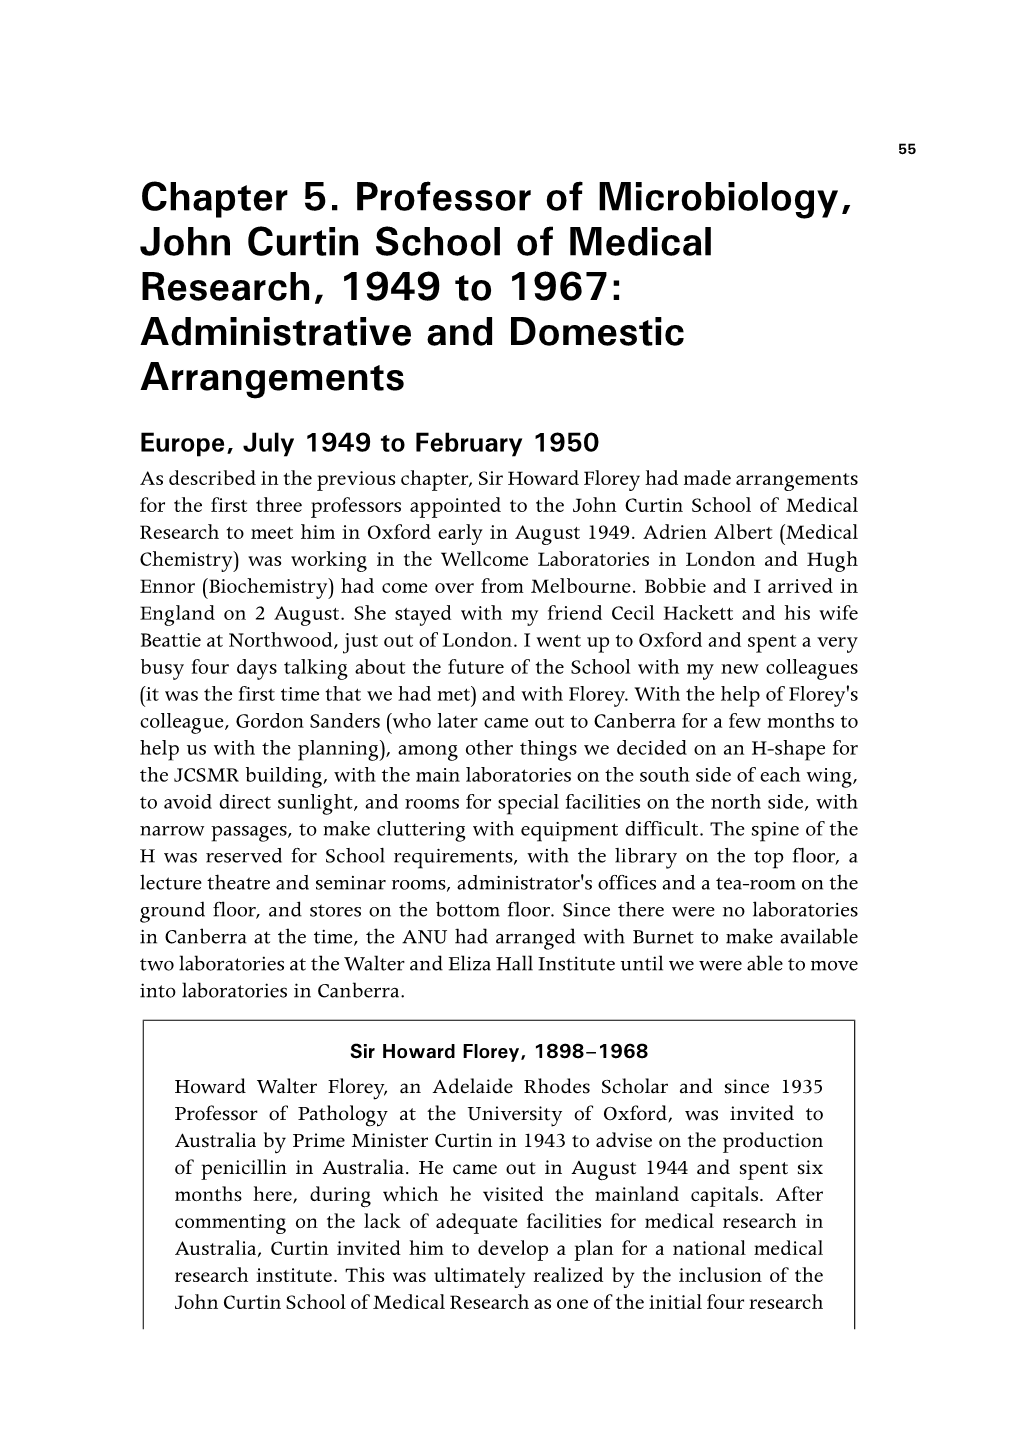 Professor of Microbiology, John Curtin School of Medical Research, 1949 to 1967: Administrative and Domestic Arrangements